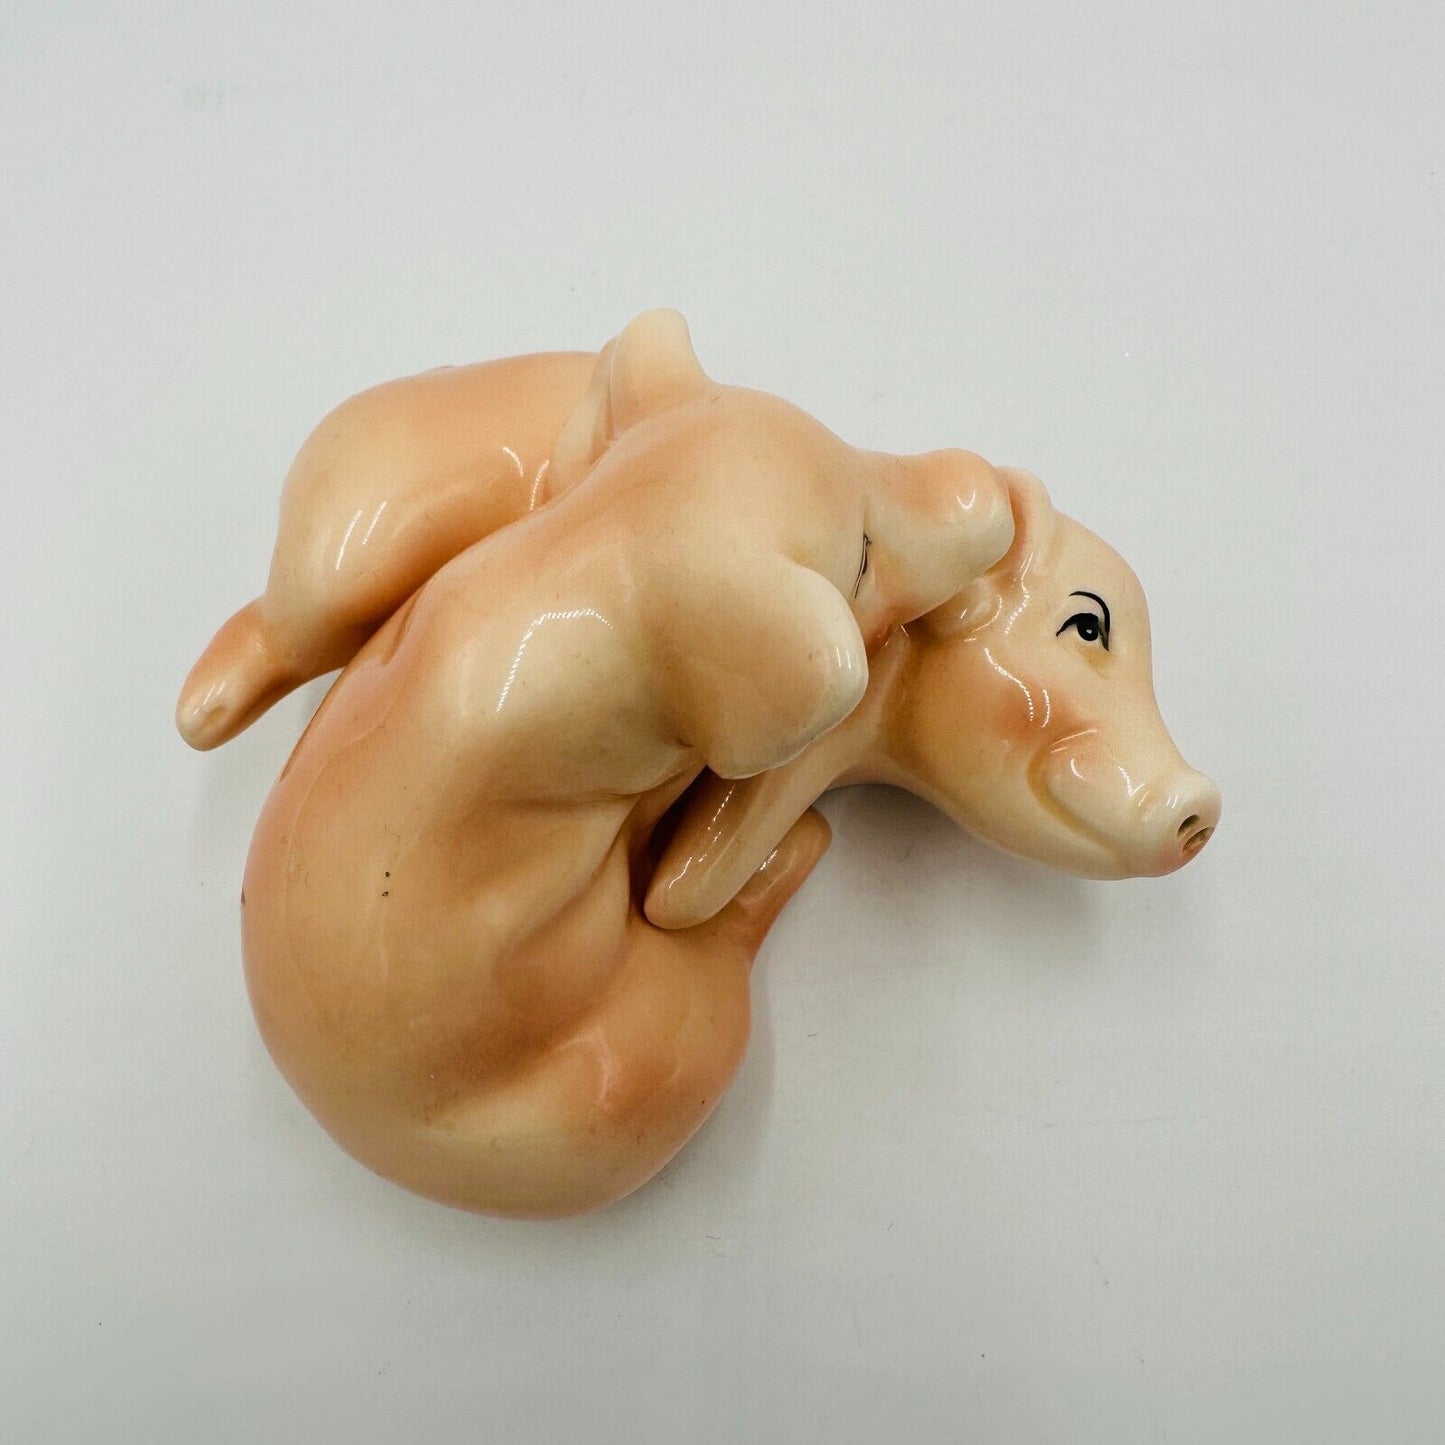 Abbott Salt and Pepper Pigs Ceramic Made in Japan Collectible Table Collection